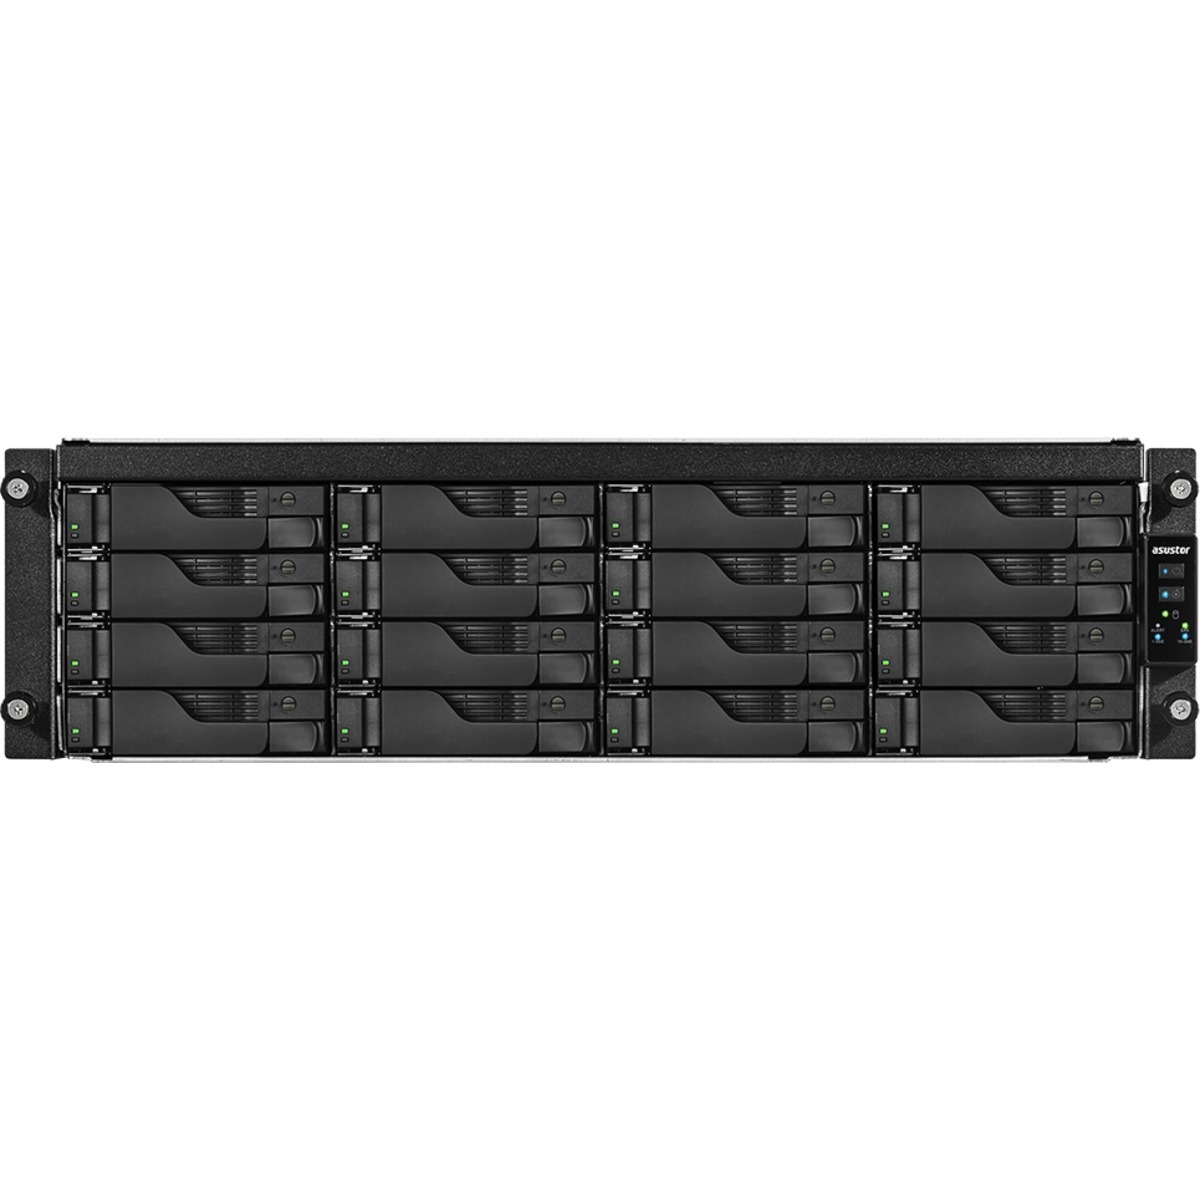 buy $8707 ASUSTOR AS7116RDX Lockerstor 16R Pro 96tb RackMount NAS - Network Attached Storage Device 16x6000gb Western Digital Blue WD60EZAZ 3.5 5400rpm SATA 6Gb/s HDD CONSUMER Class Drives Installed - Burn-In Tested - nas headquarters buy network attached storage server device das new raid-5 free shipping usa christmas new year holiday sale AS7116RDX Lockerstor 16R Pro